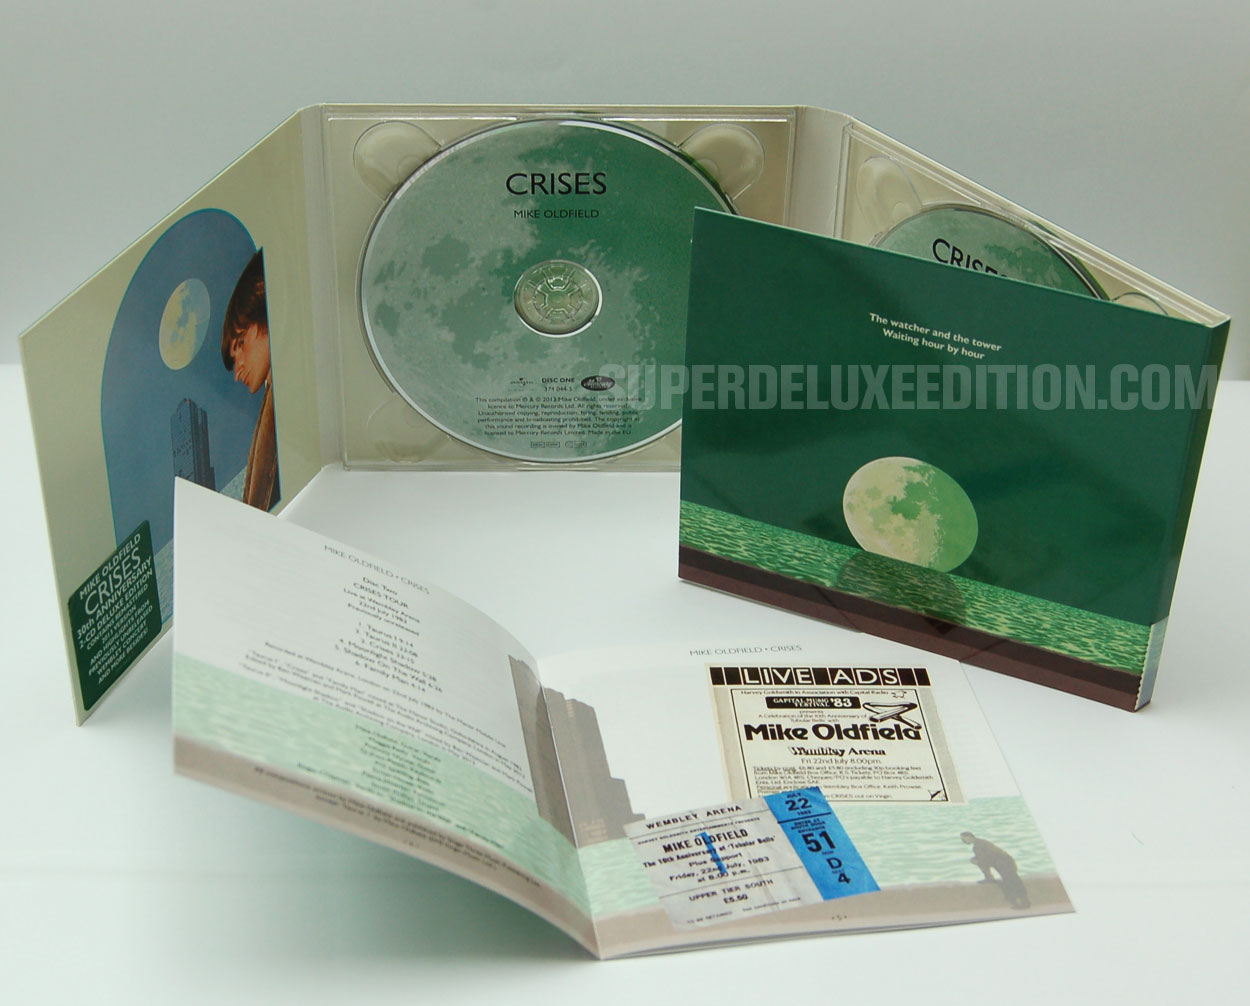 FIRST PICTURES: Mike Oldfield / “Crises” box set and deluxe edition ...